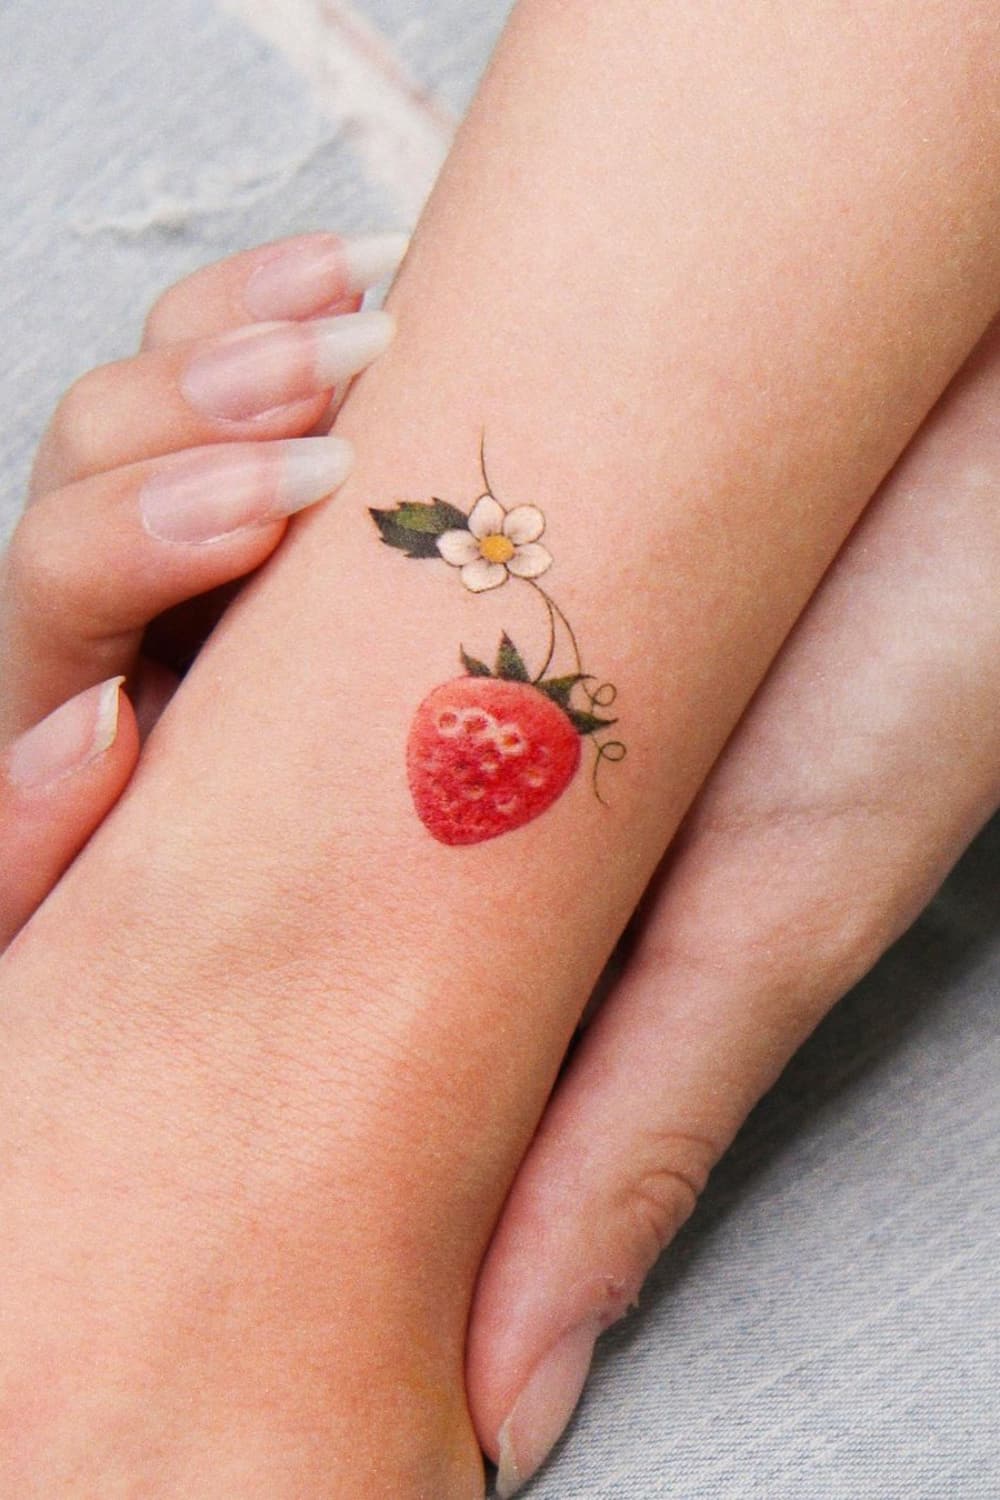 Strawberry Tattoo With Flower and Vine